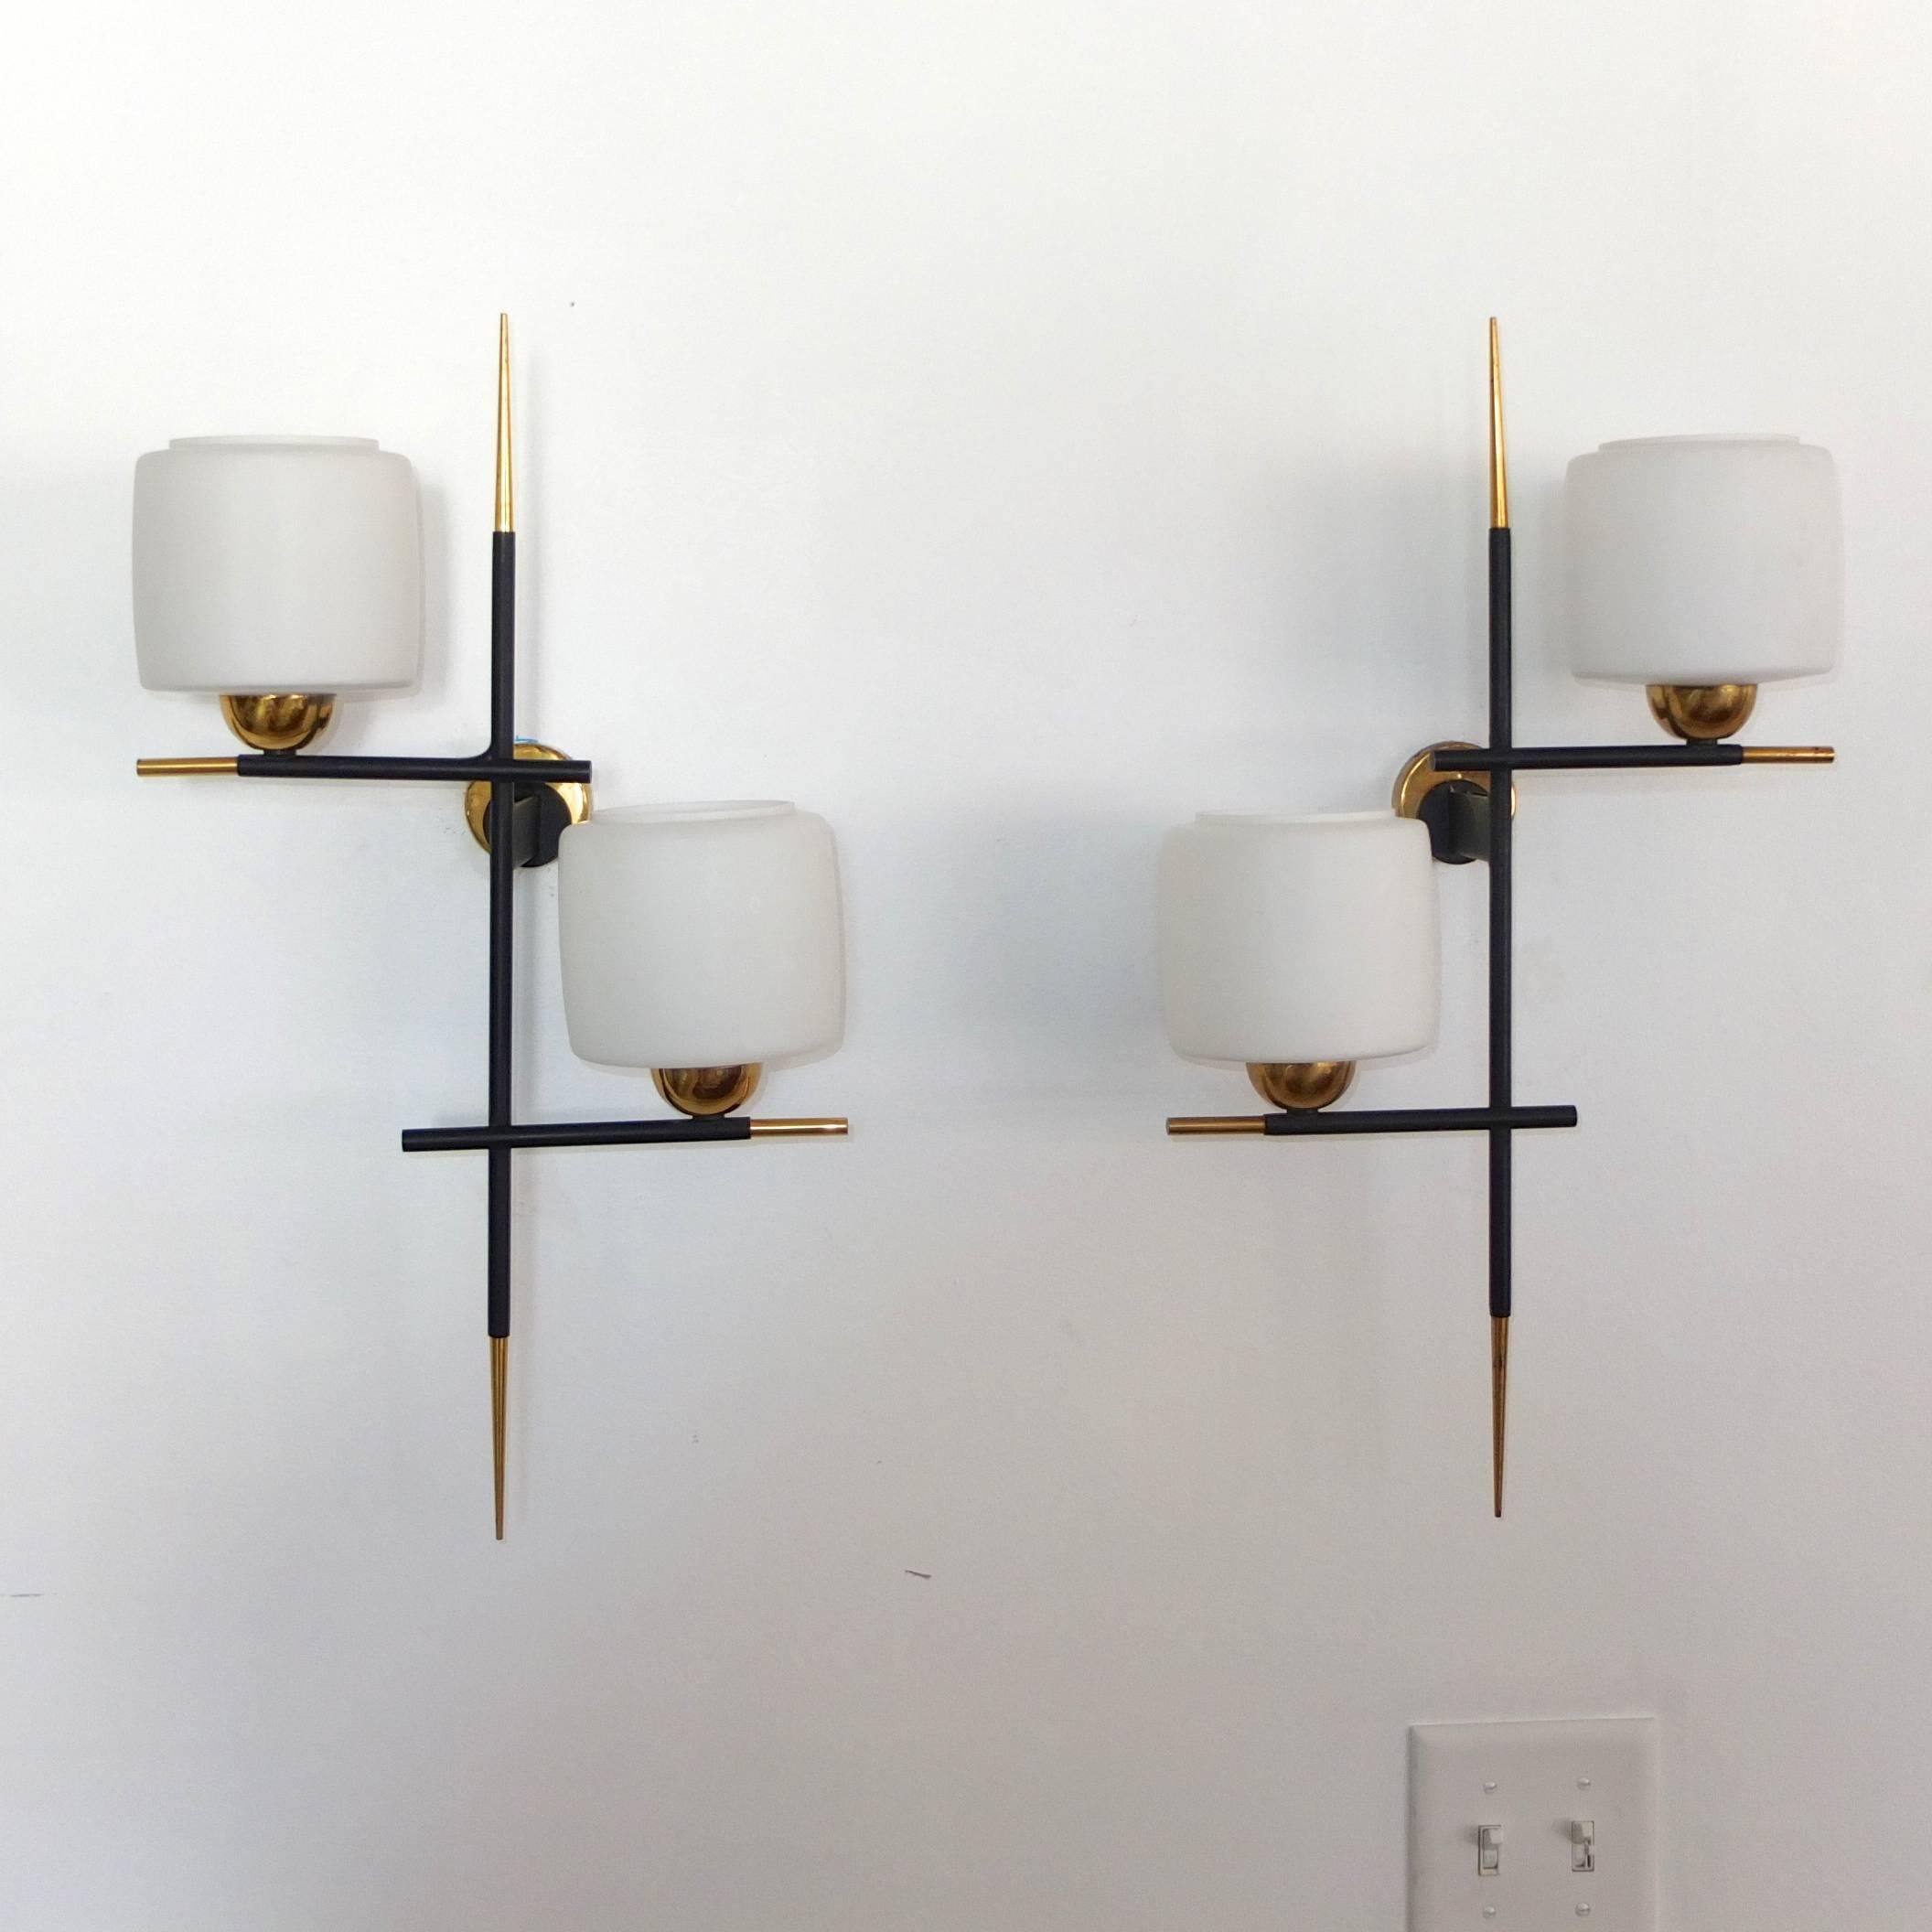 Pair of modernist linear sconces comprised of matte black enameled brass tubular criss crossing structure with solid brass spiked finials and opaline glass open globe shades.

Designed by Gaston Fossati for Ateliers d'Art d'Uzes.

Often mistaken